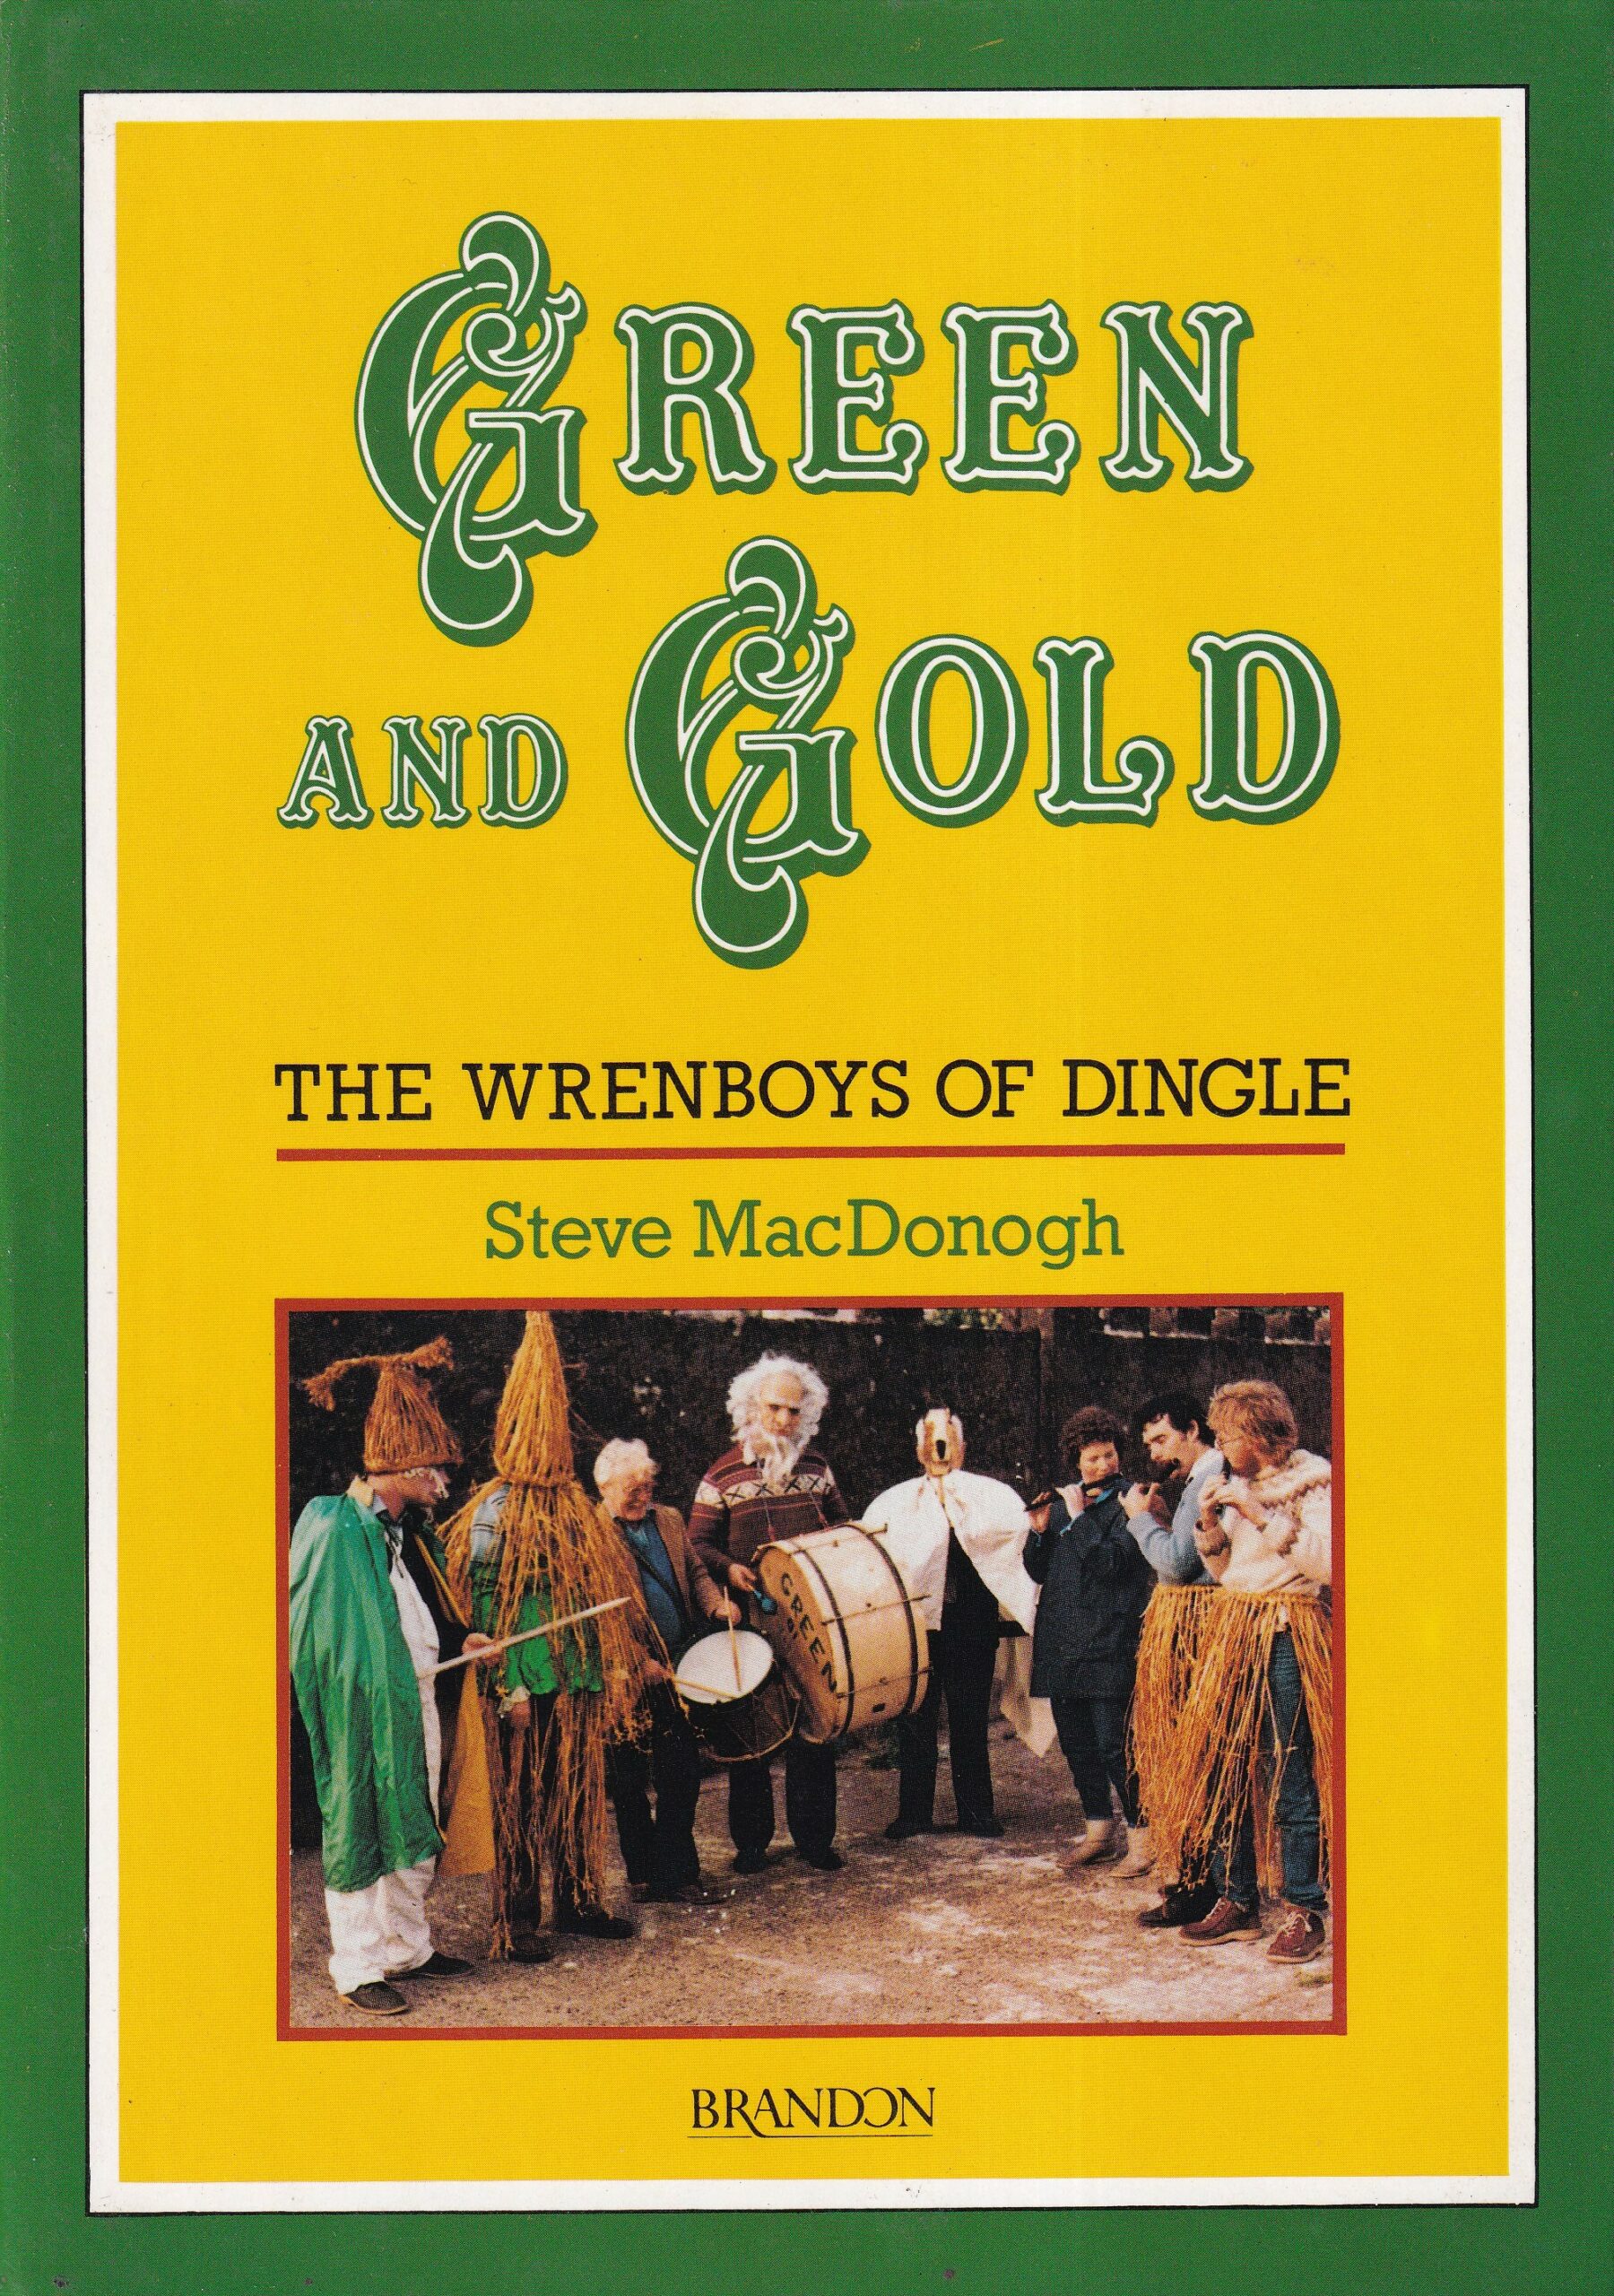 Green and Gold: The Wrenboys of Dingle by Steve MacDonogh